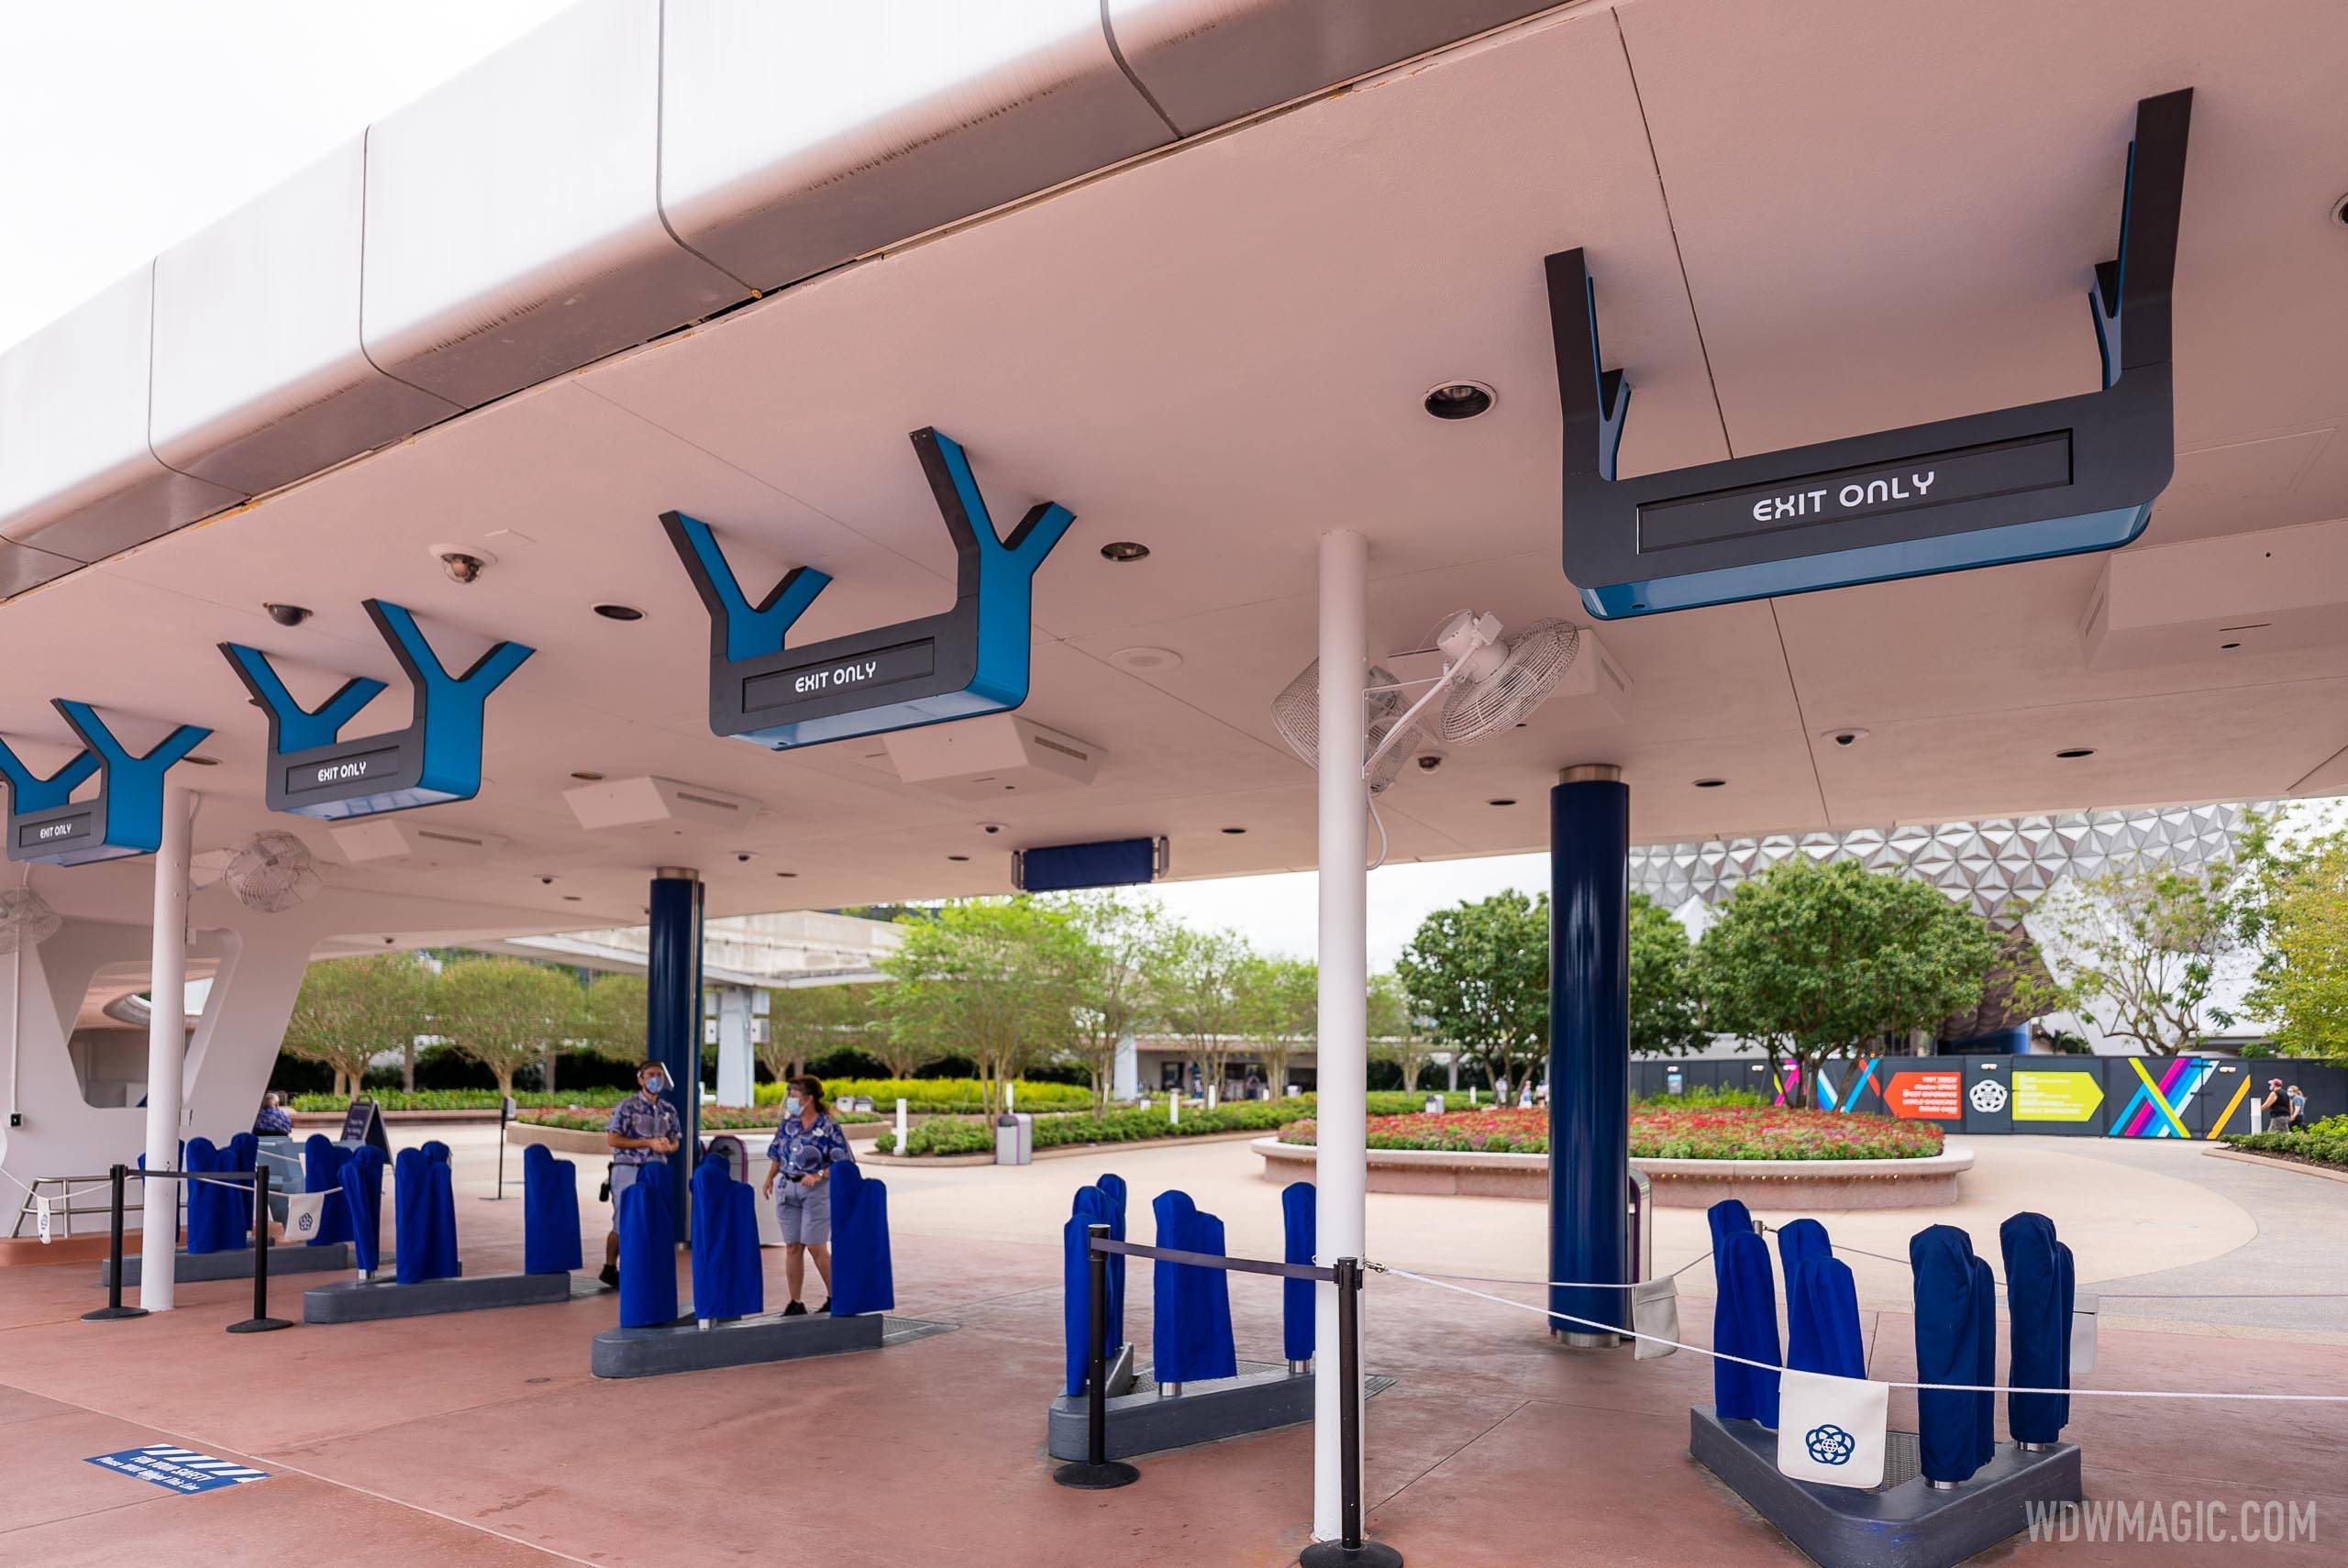 PHOTOS - More of EPCOT's new signage and blue accents